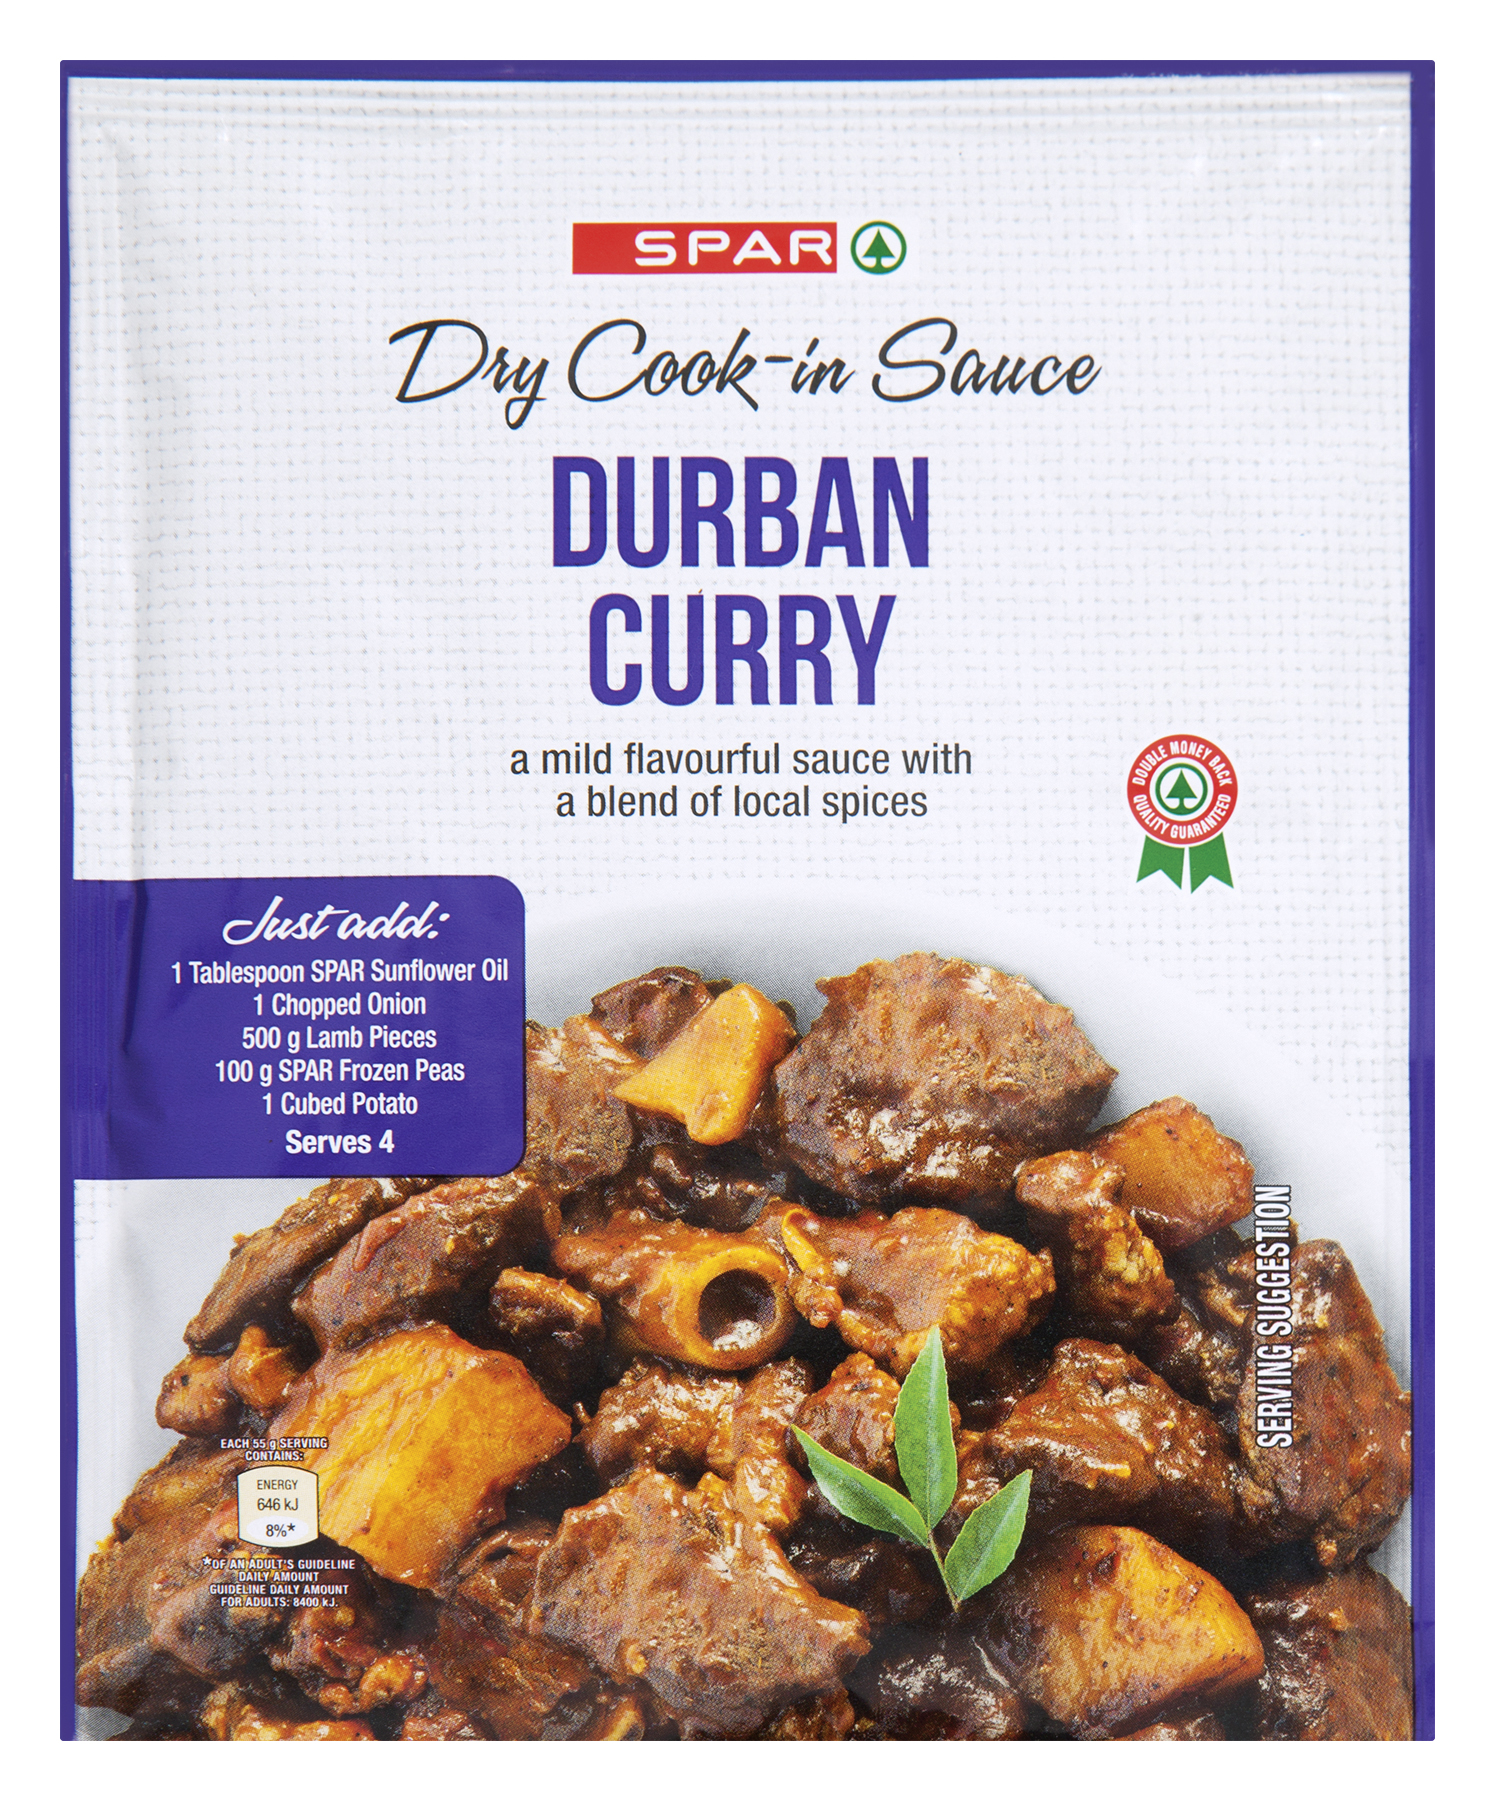 dry cook-in-sauce durban curry 